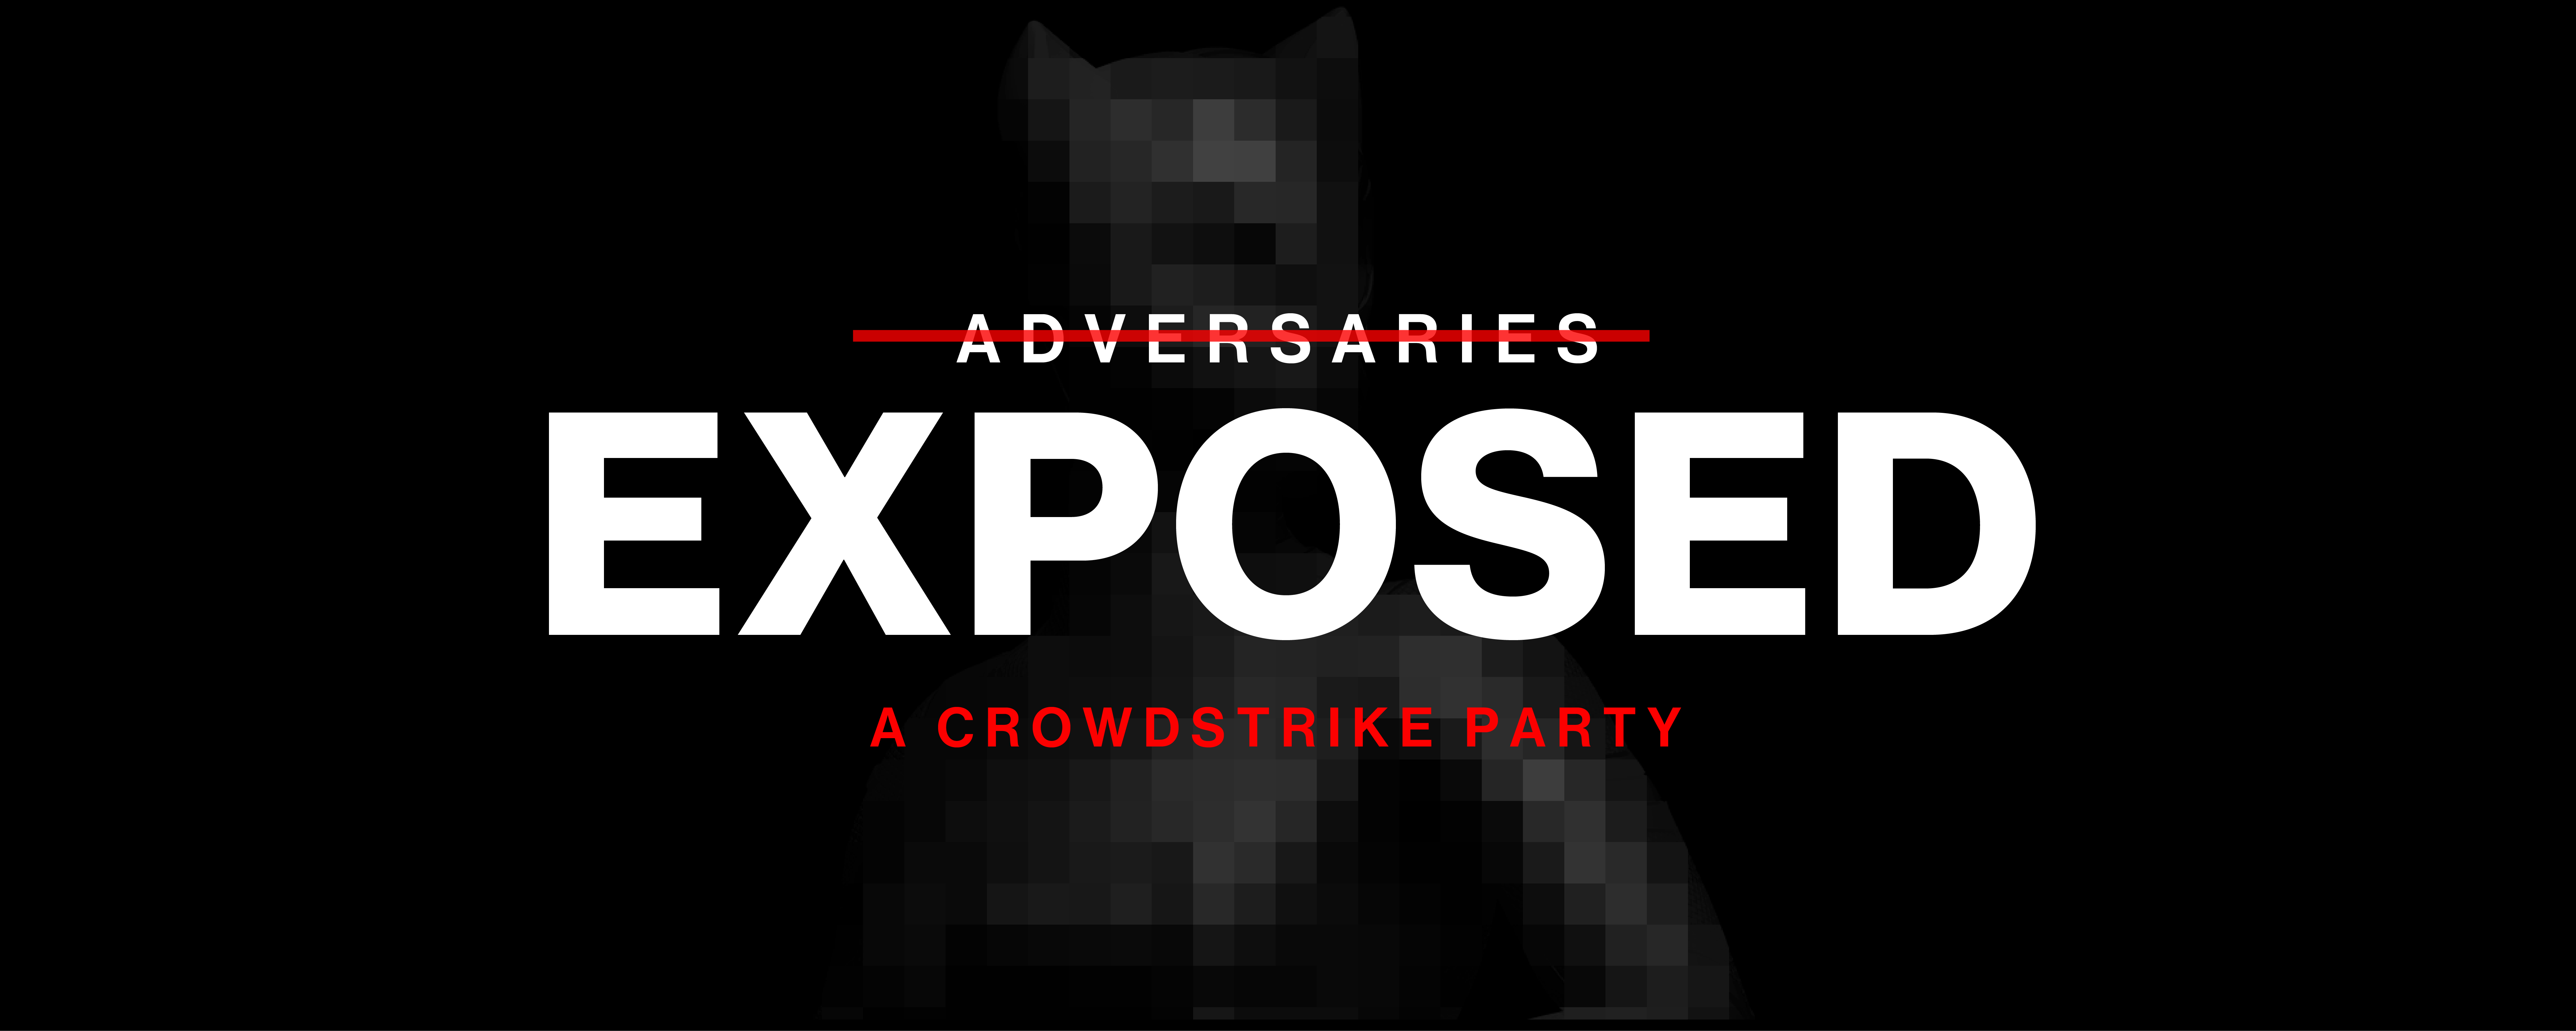 Adversaries Exposed Party